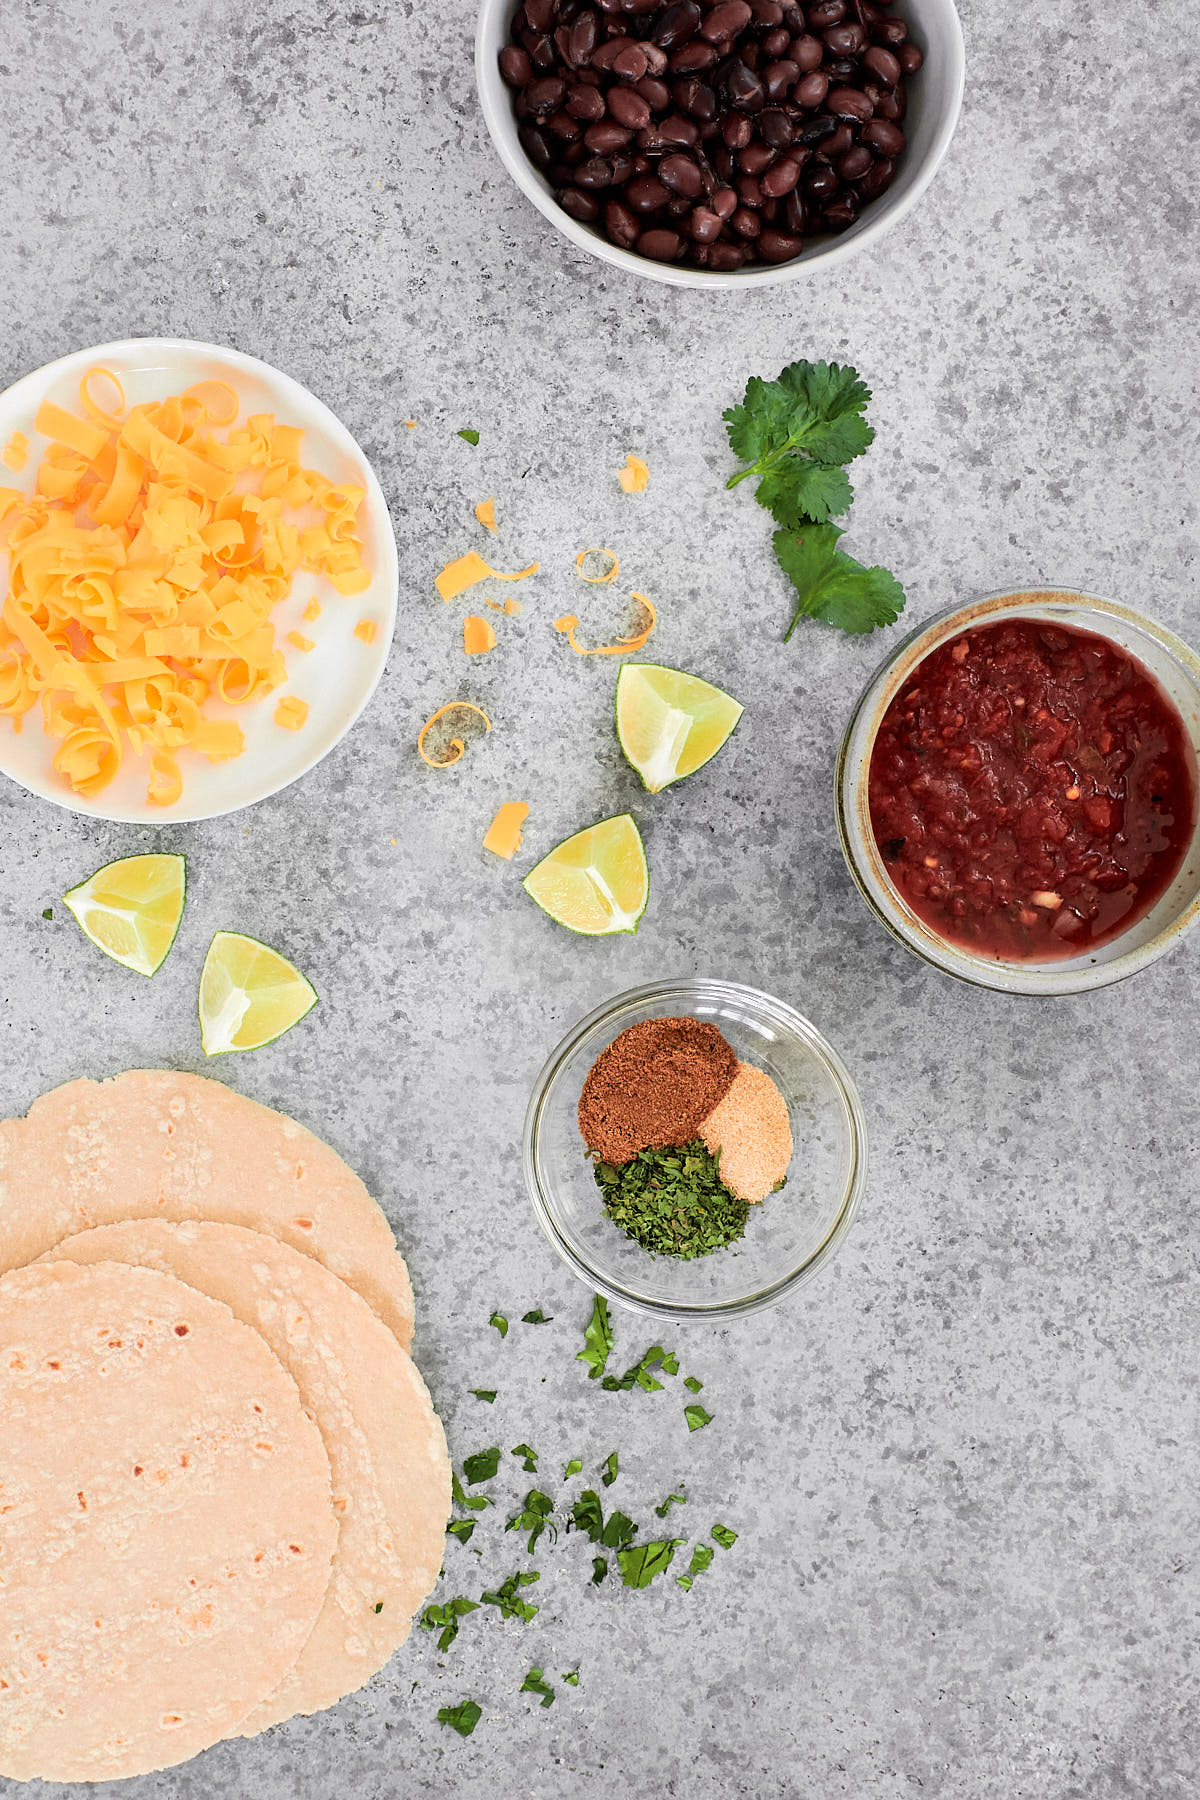 Taco ingredients | corn tortillas, cheese, black beans, salsa + spices